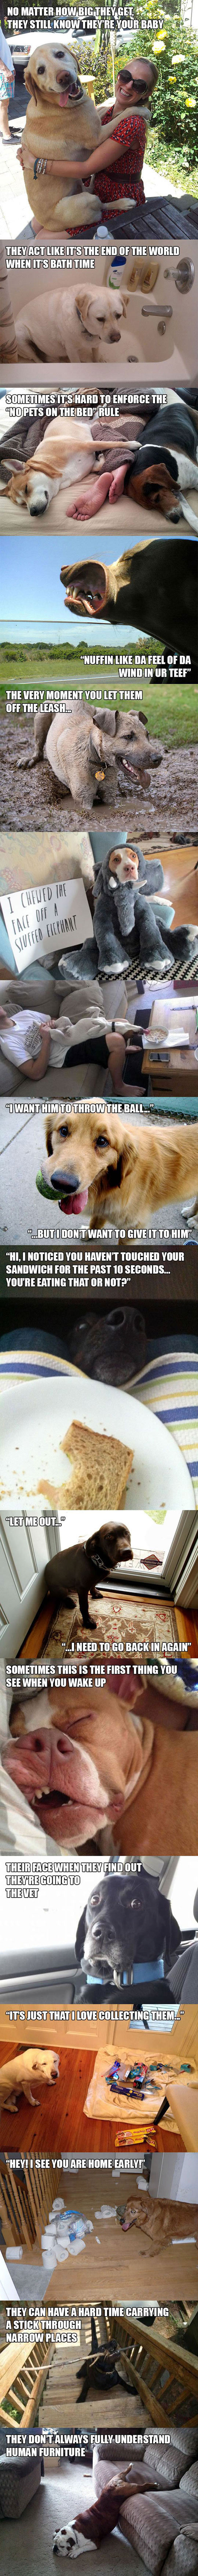 Struggles Only Dog Owners Will Understand